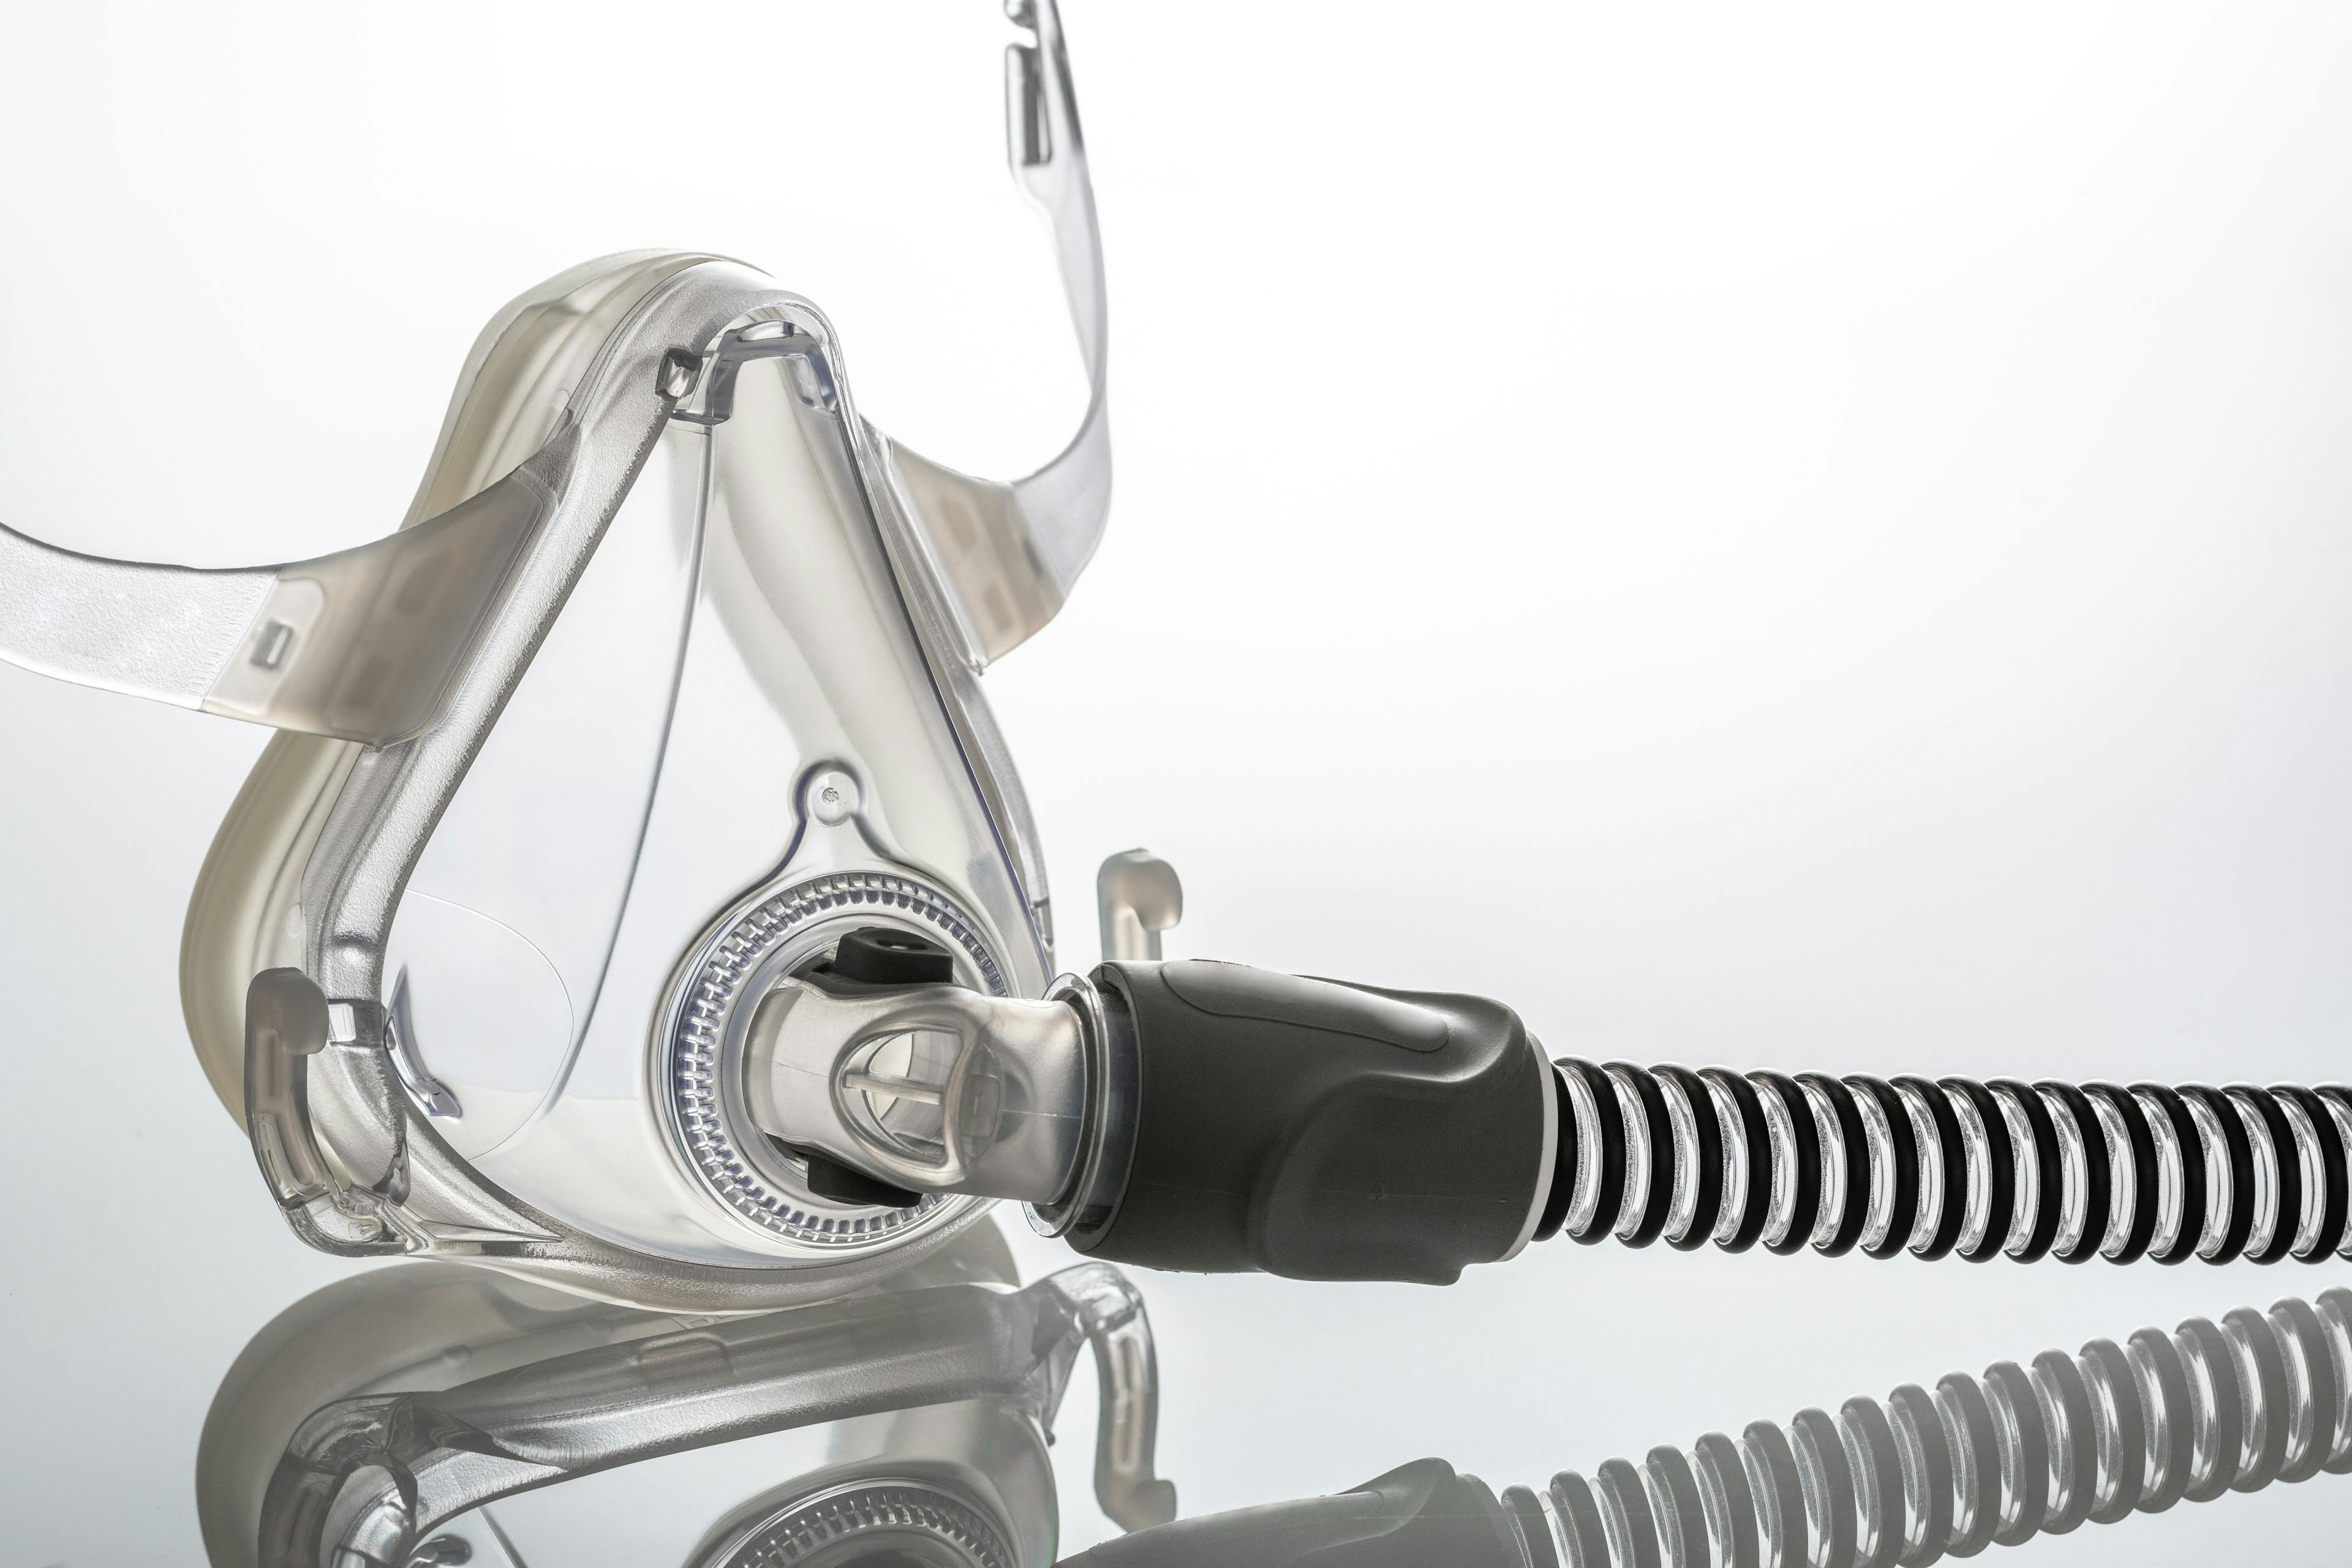 CPAP Use Can Cut Risk of Readmission in People with OSA and CVD. But Adherence…